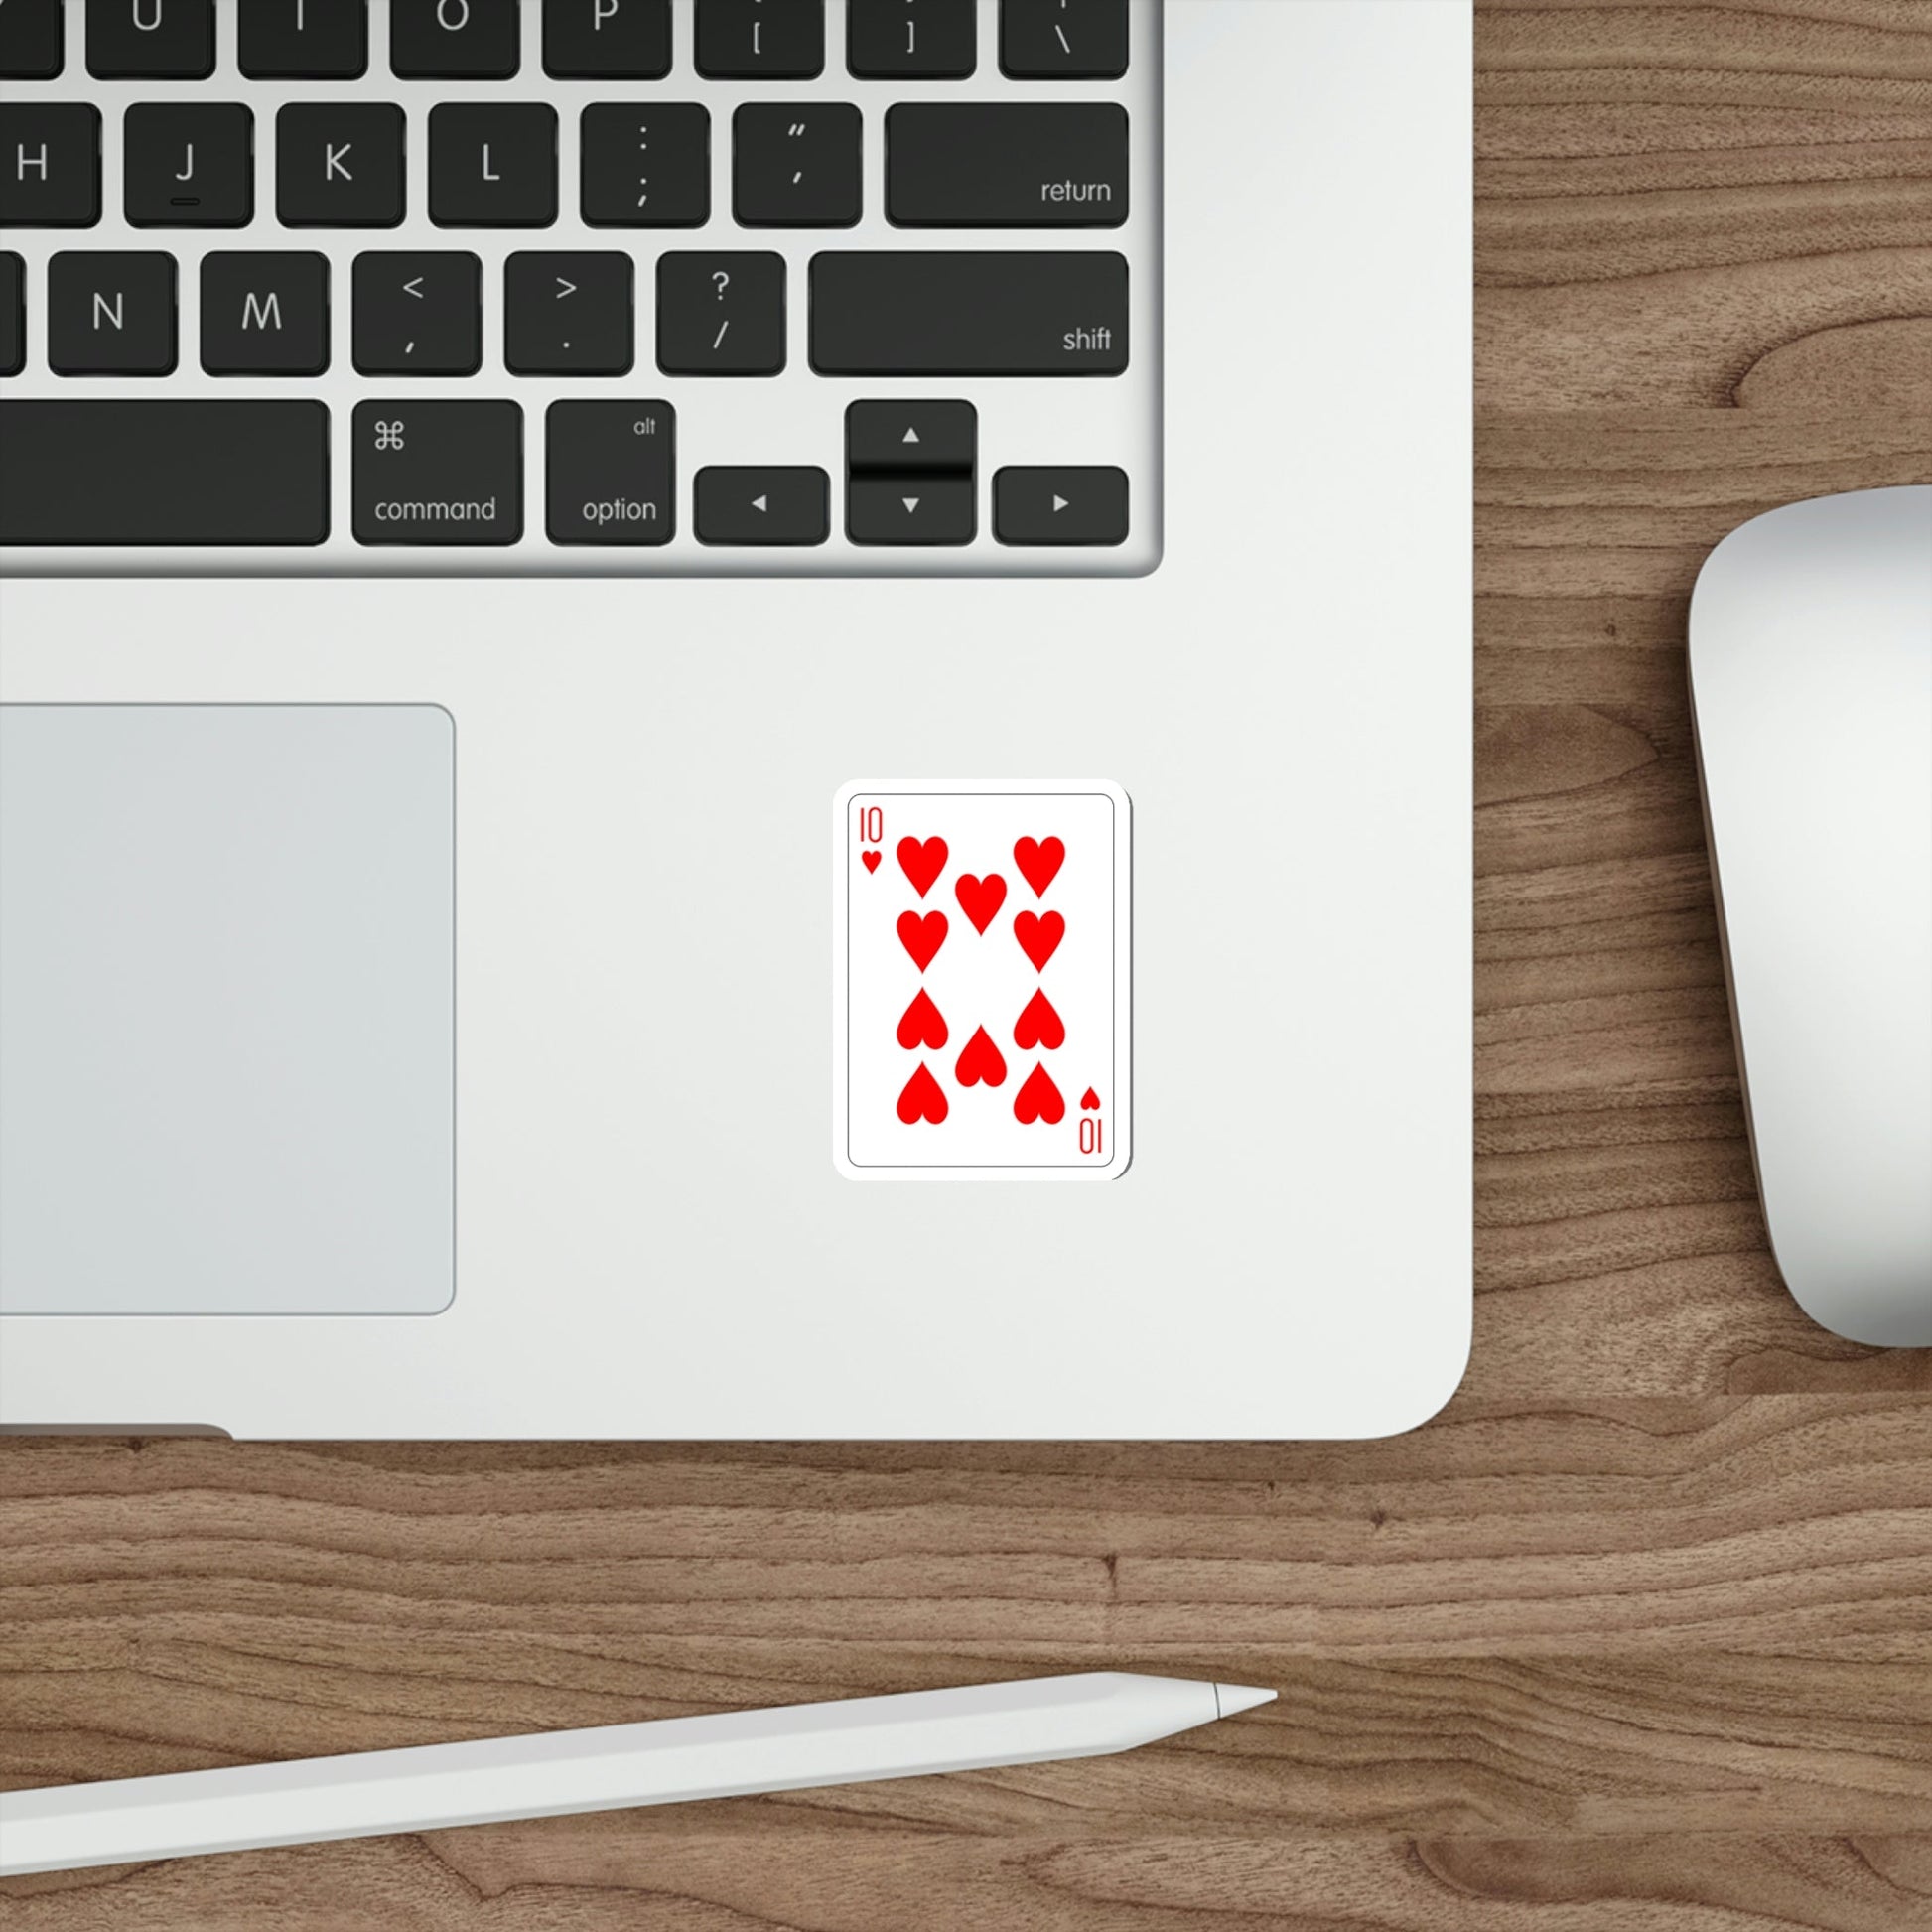 10 of Hearts Playing Card STICKER Vinyl Die-Cut Decal-The Sticker Space